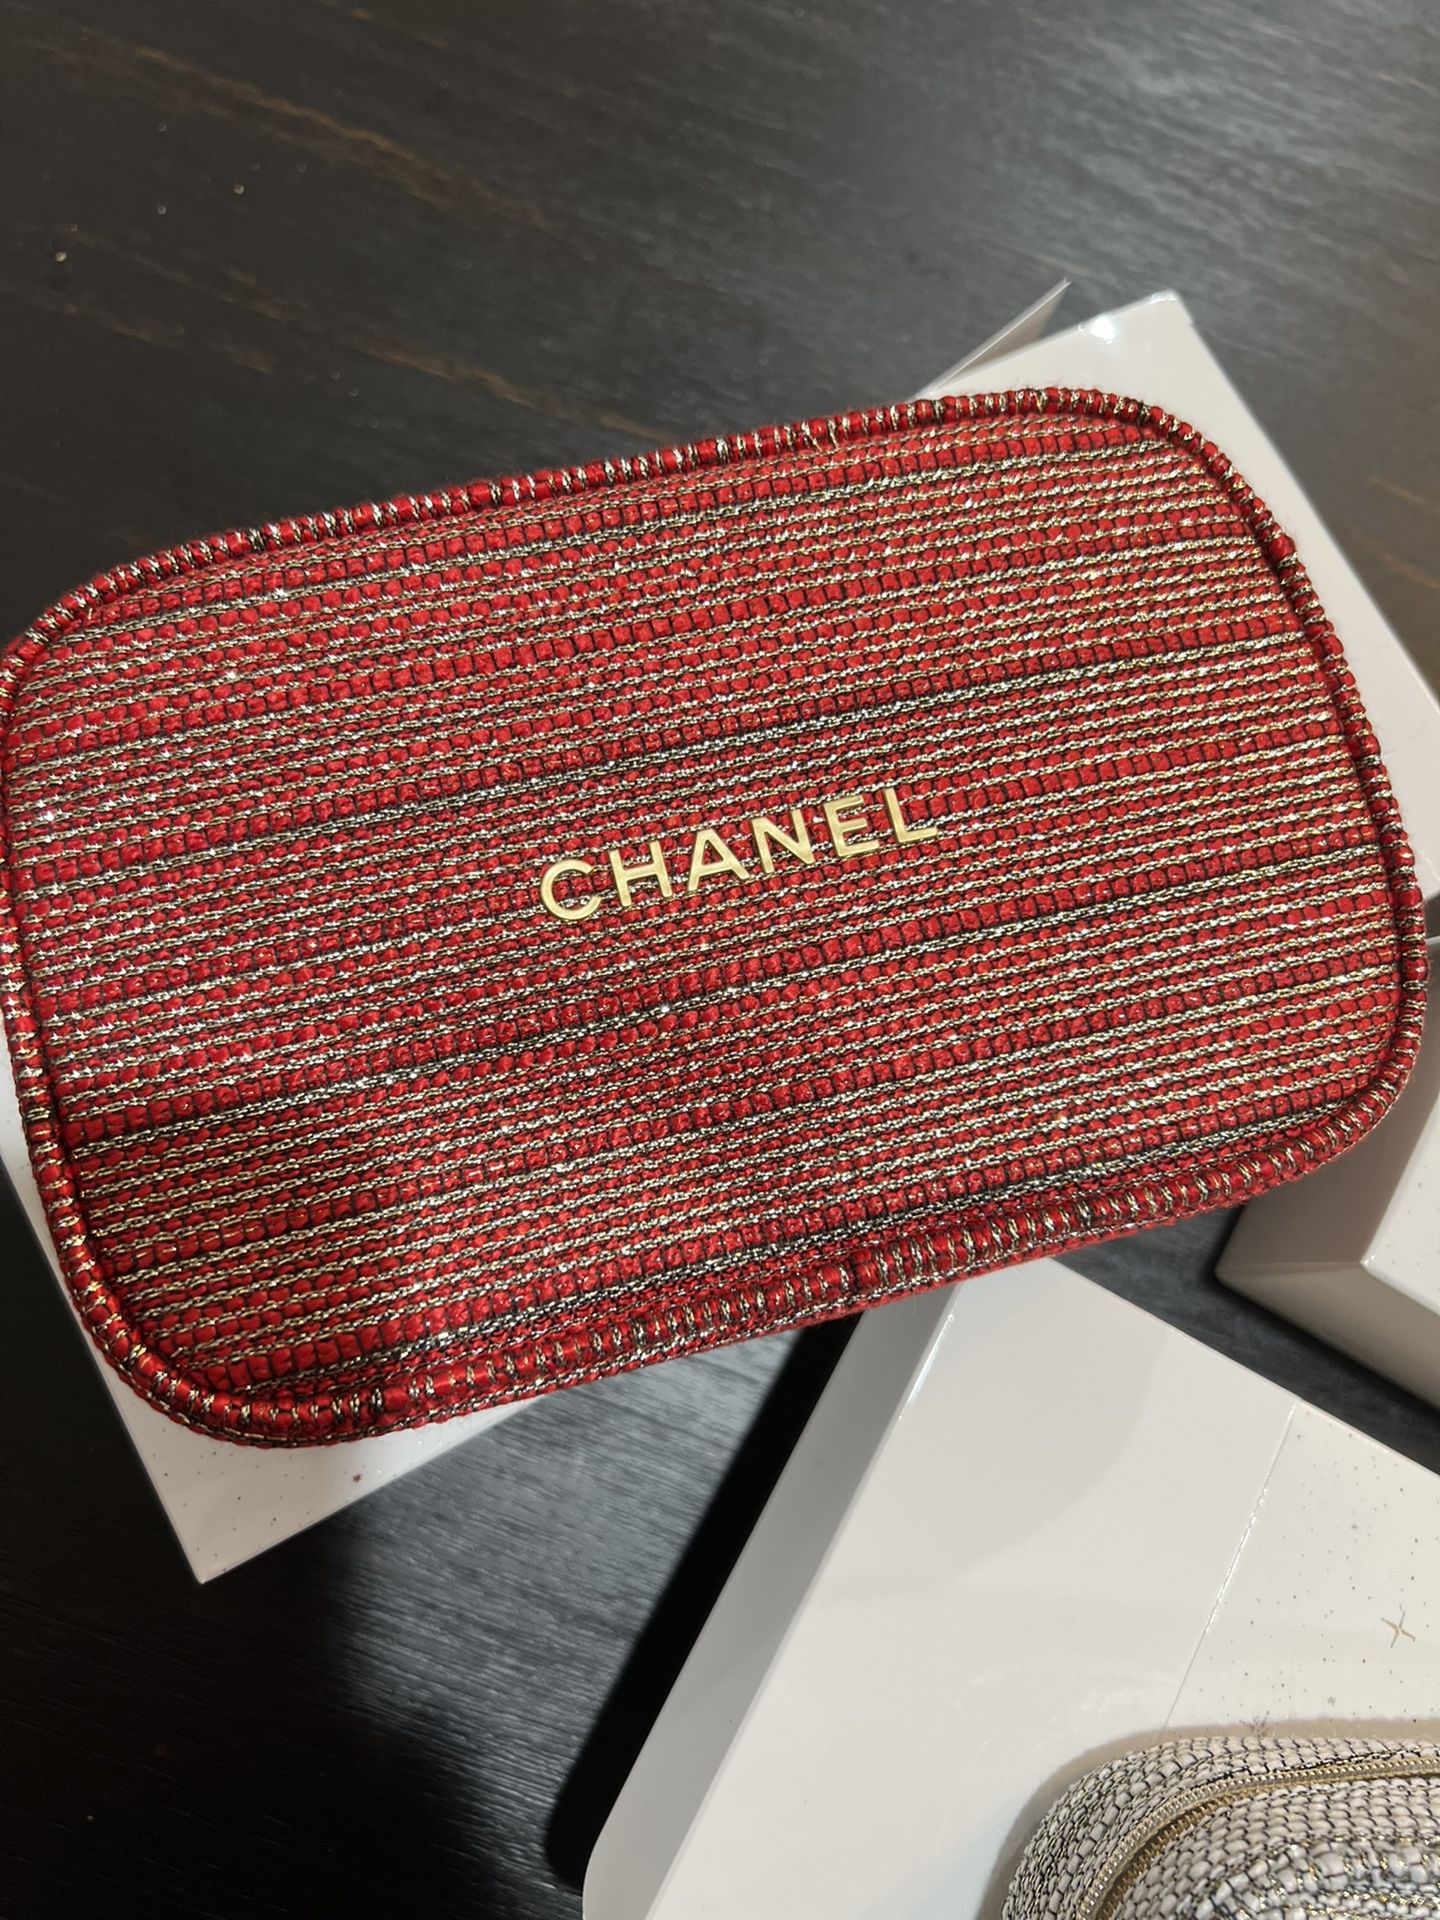 chanel cosmetic bag new